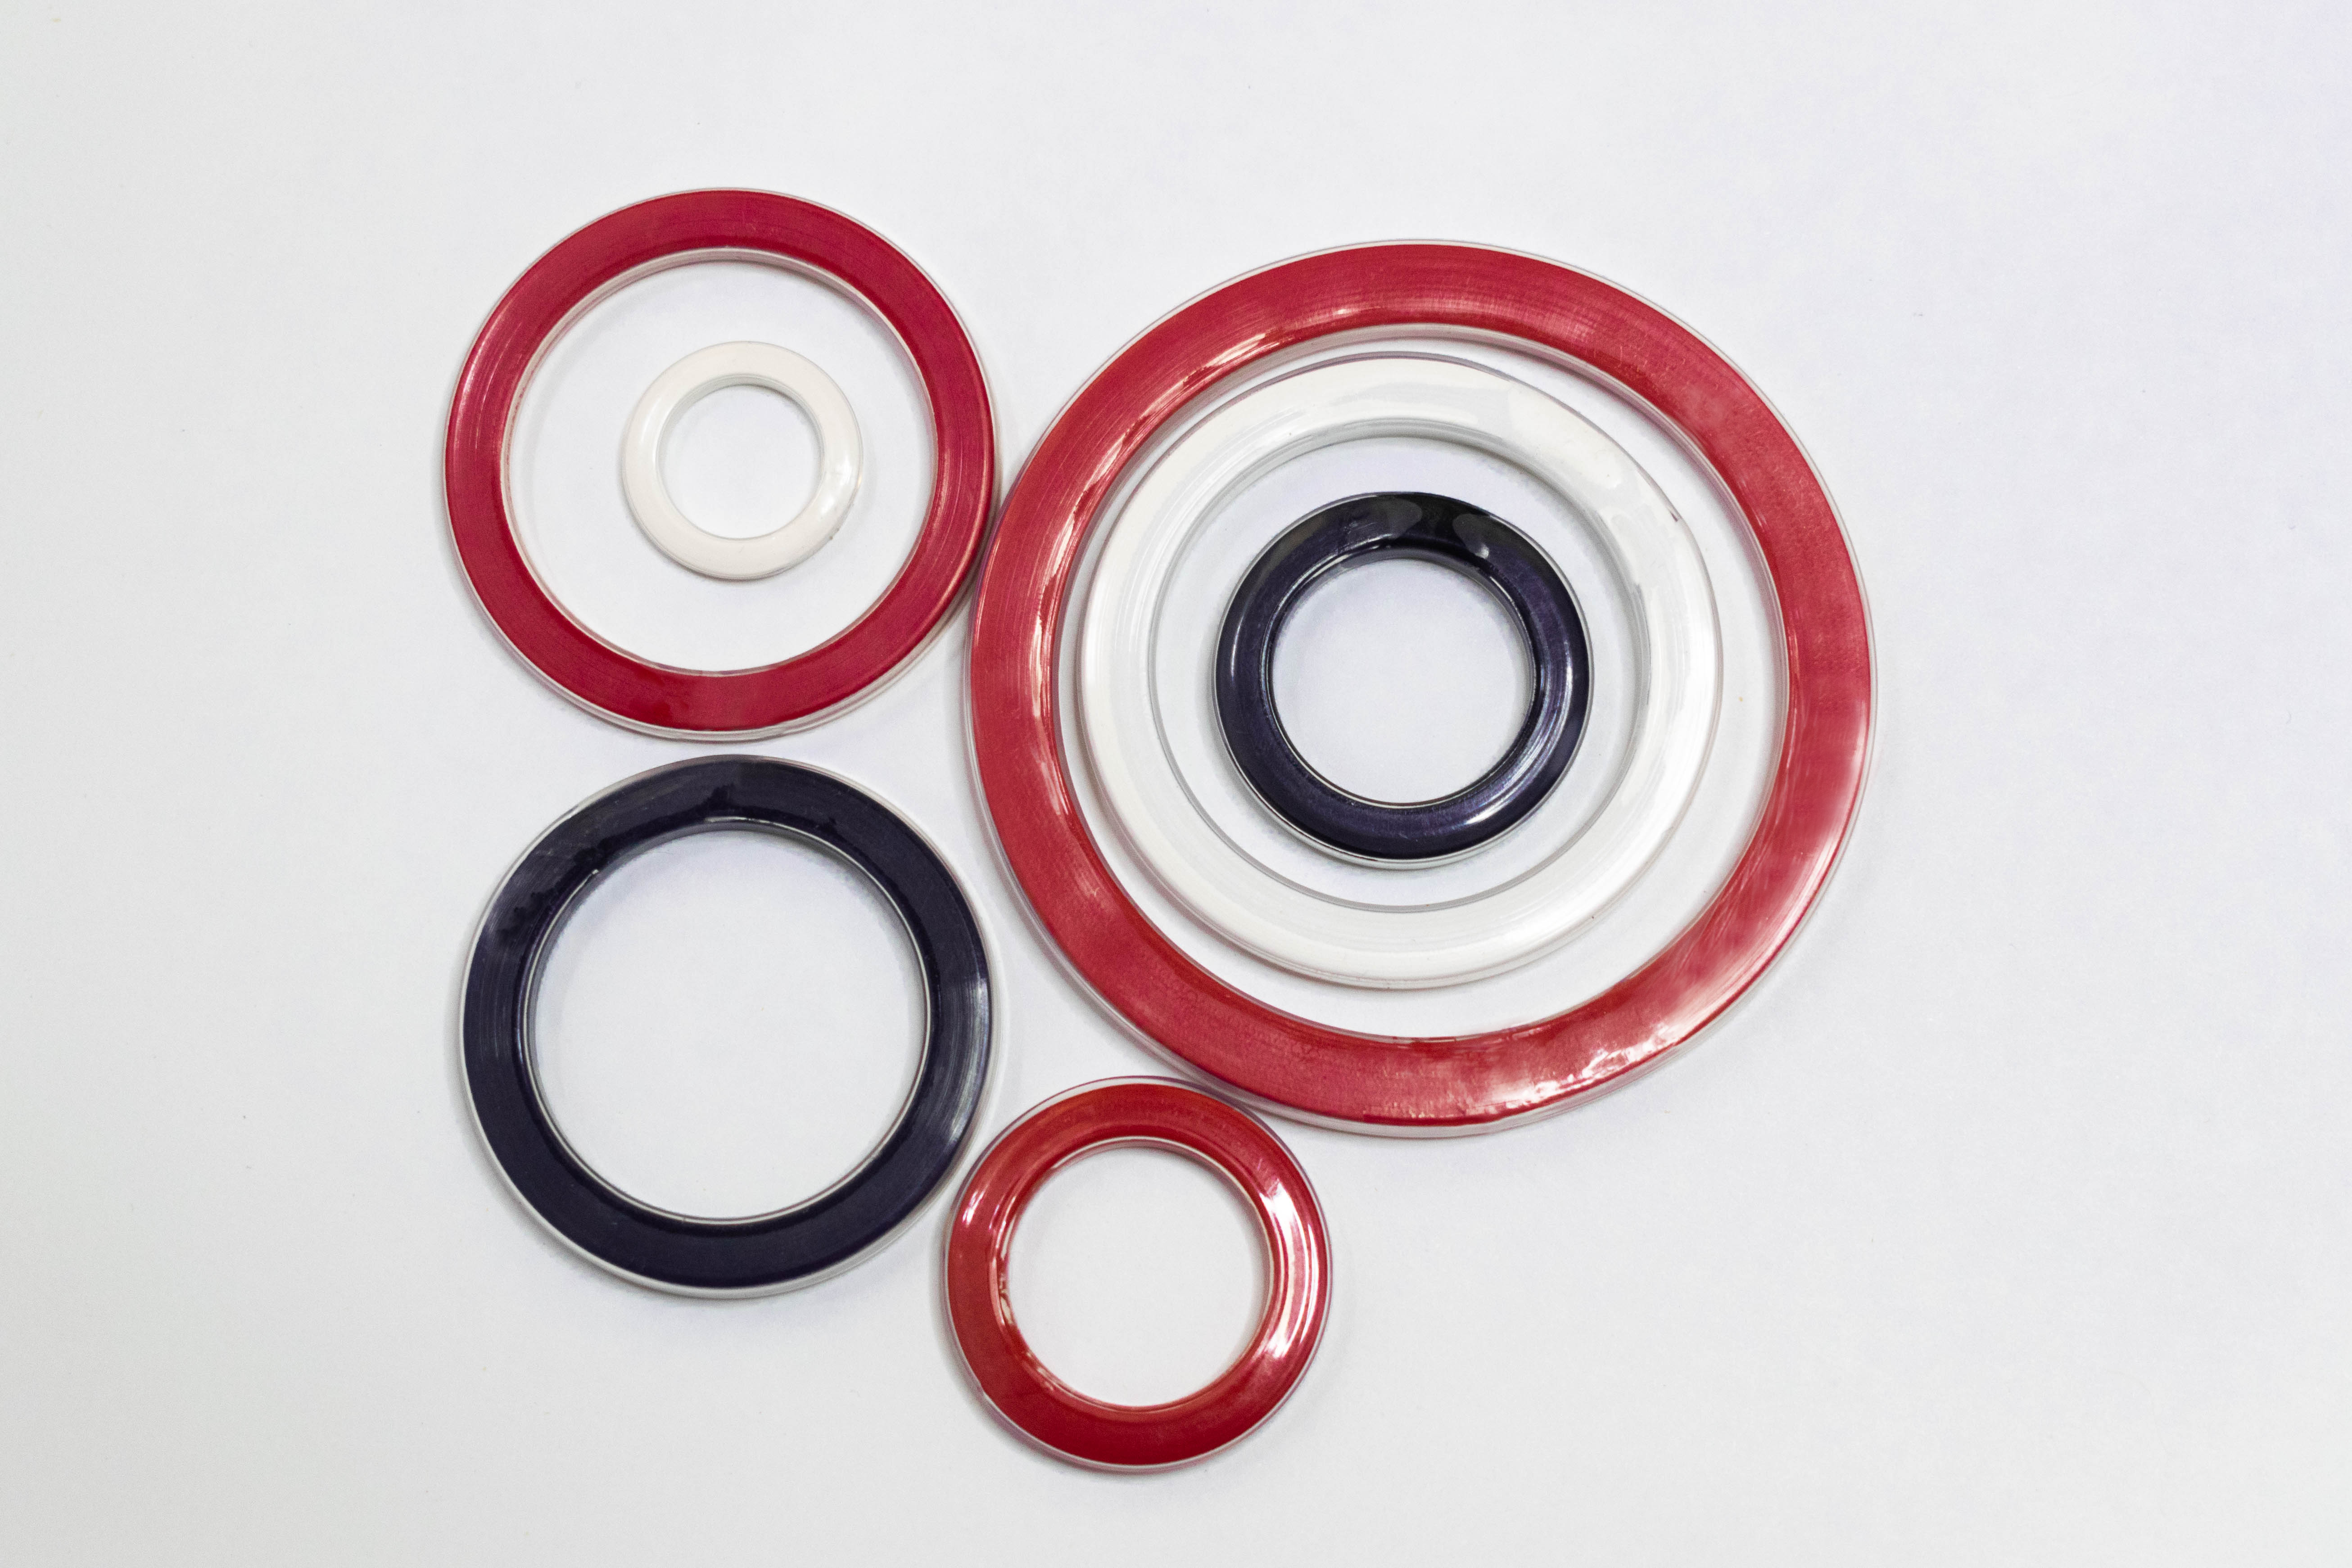 Custom Rubber O-Rings | Reliance Rubber Industries Inc.